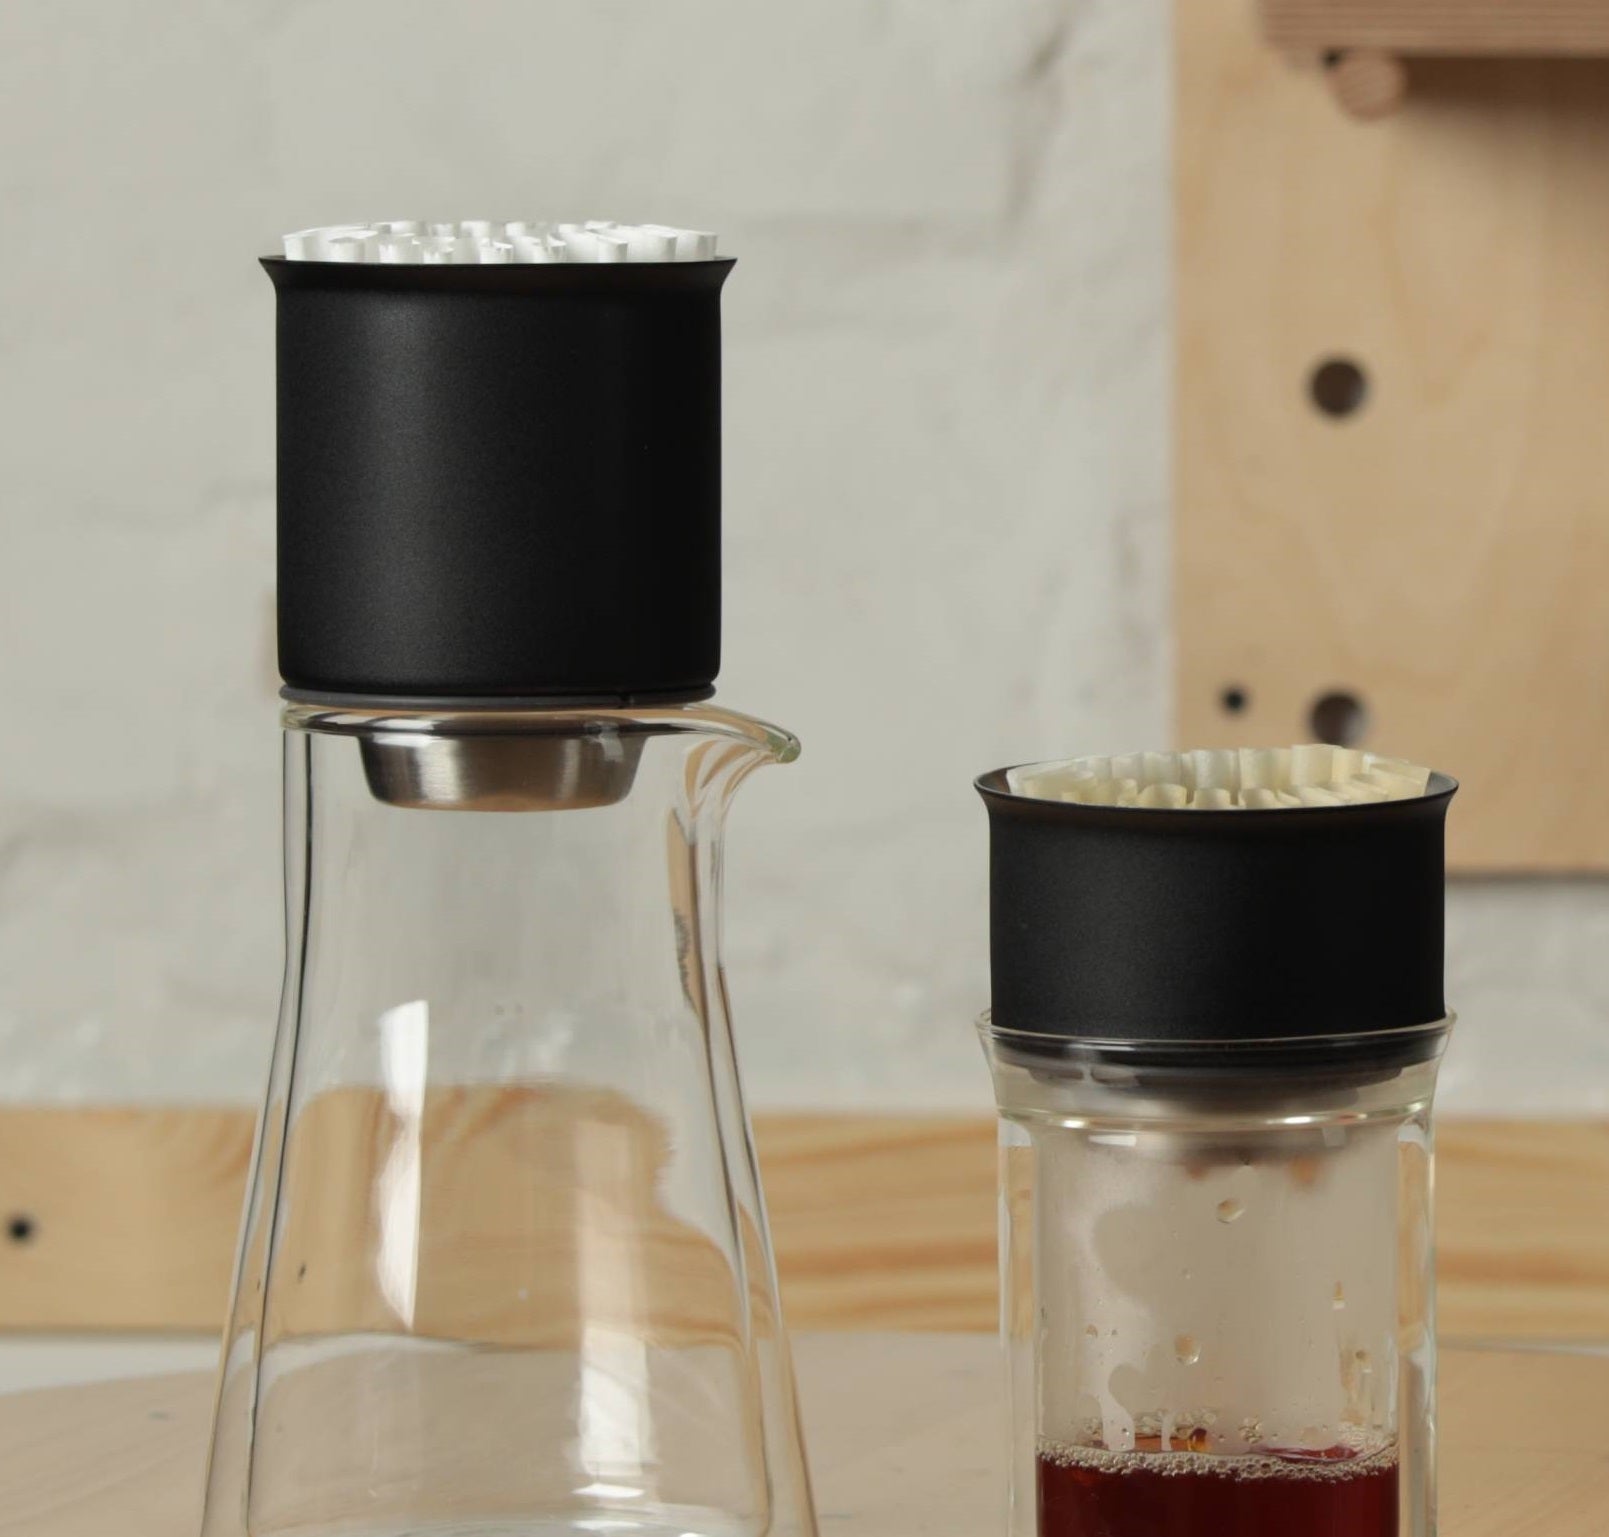 Blue Tokai - Stagg Pour Over Drippers product image